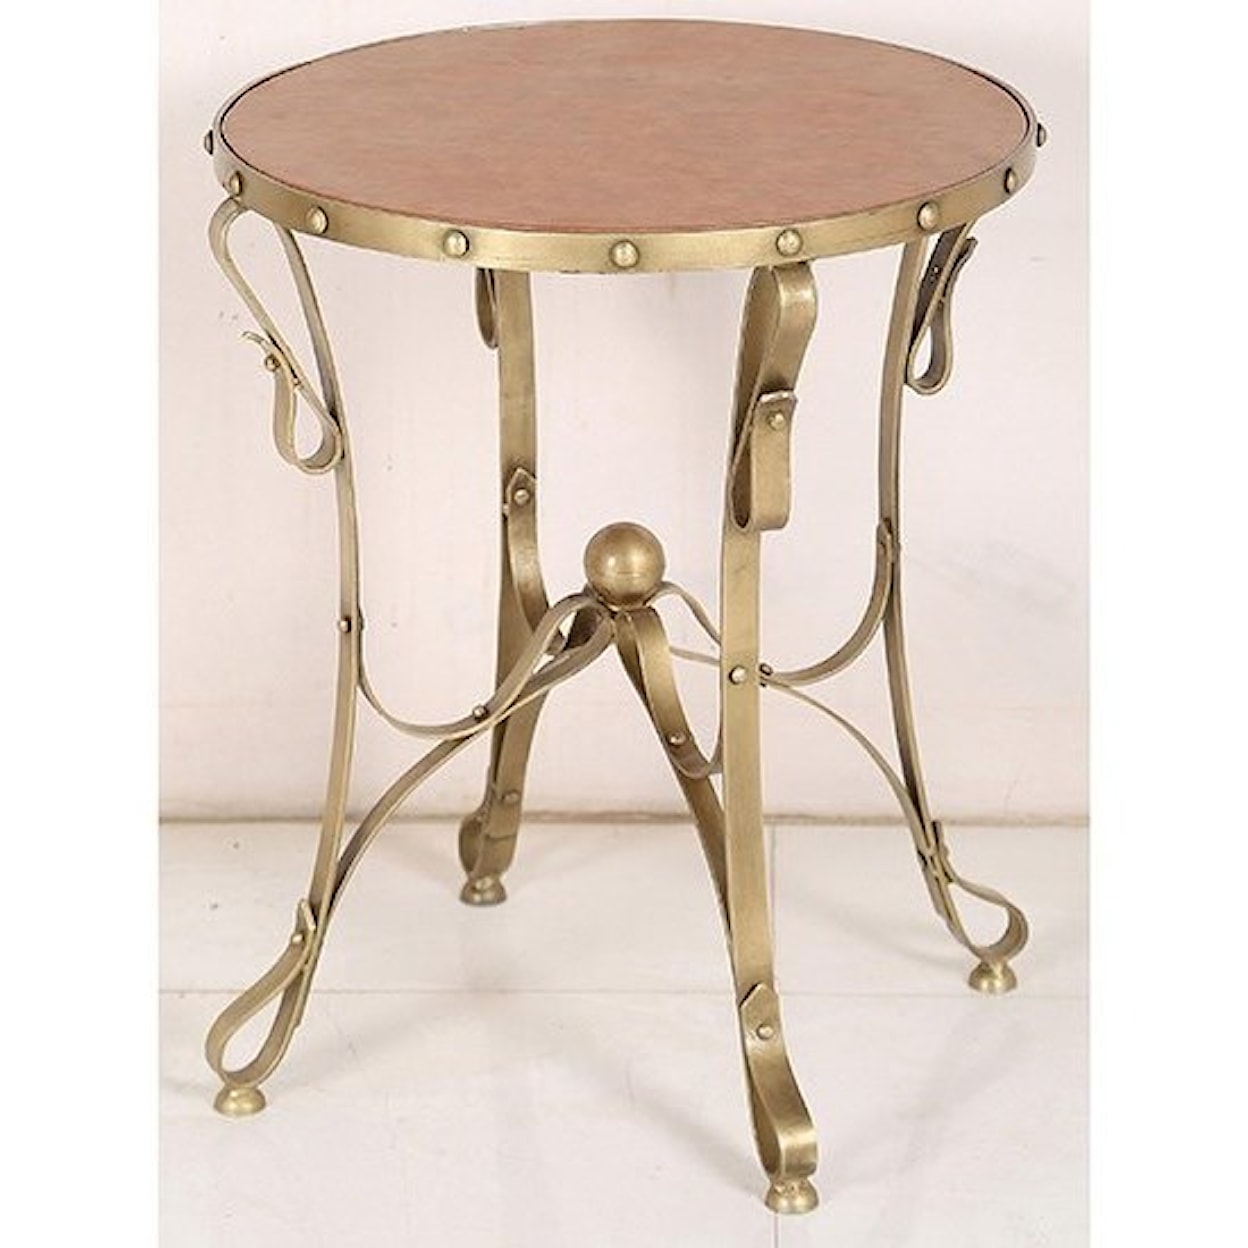 Crestview Collection Accent Furniture Solid Iron Accent Table